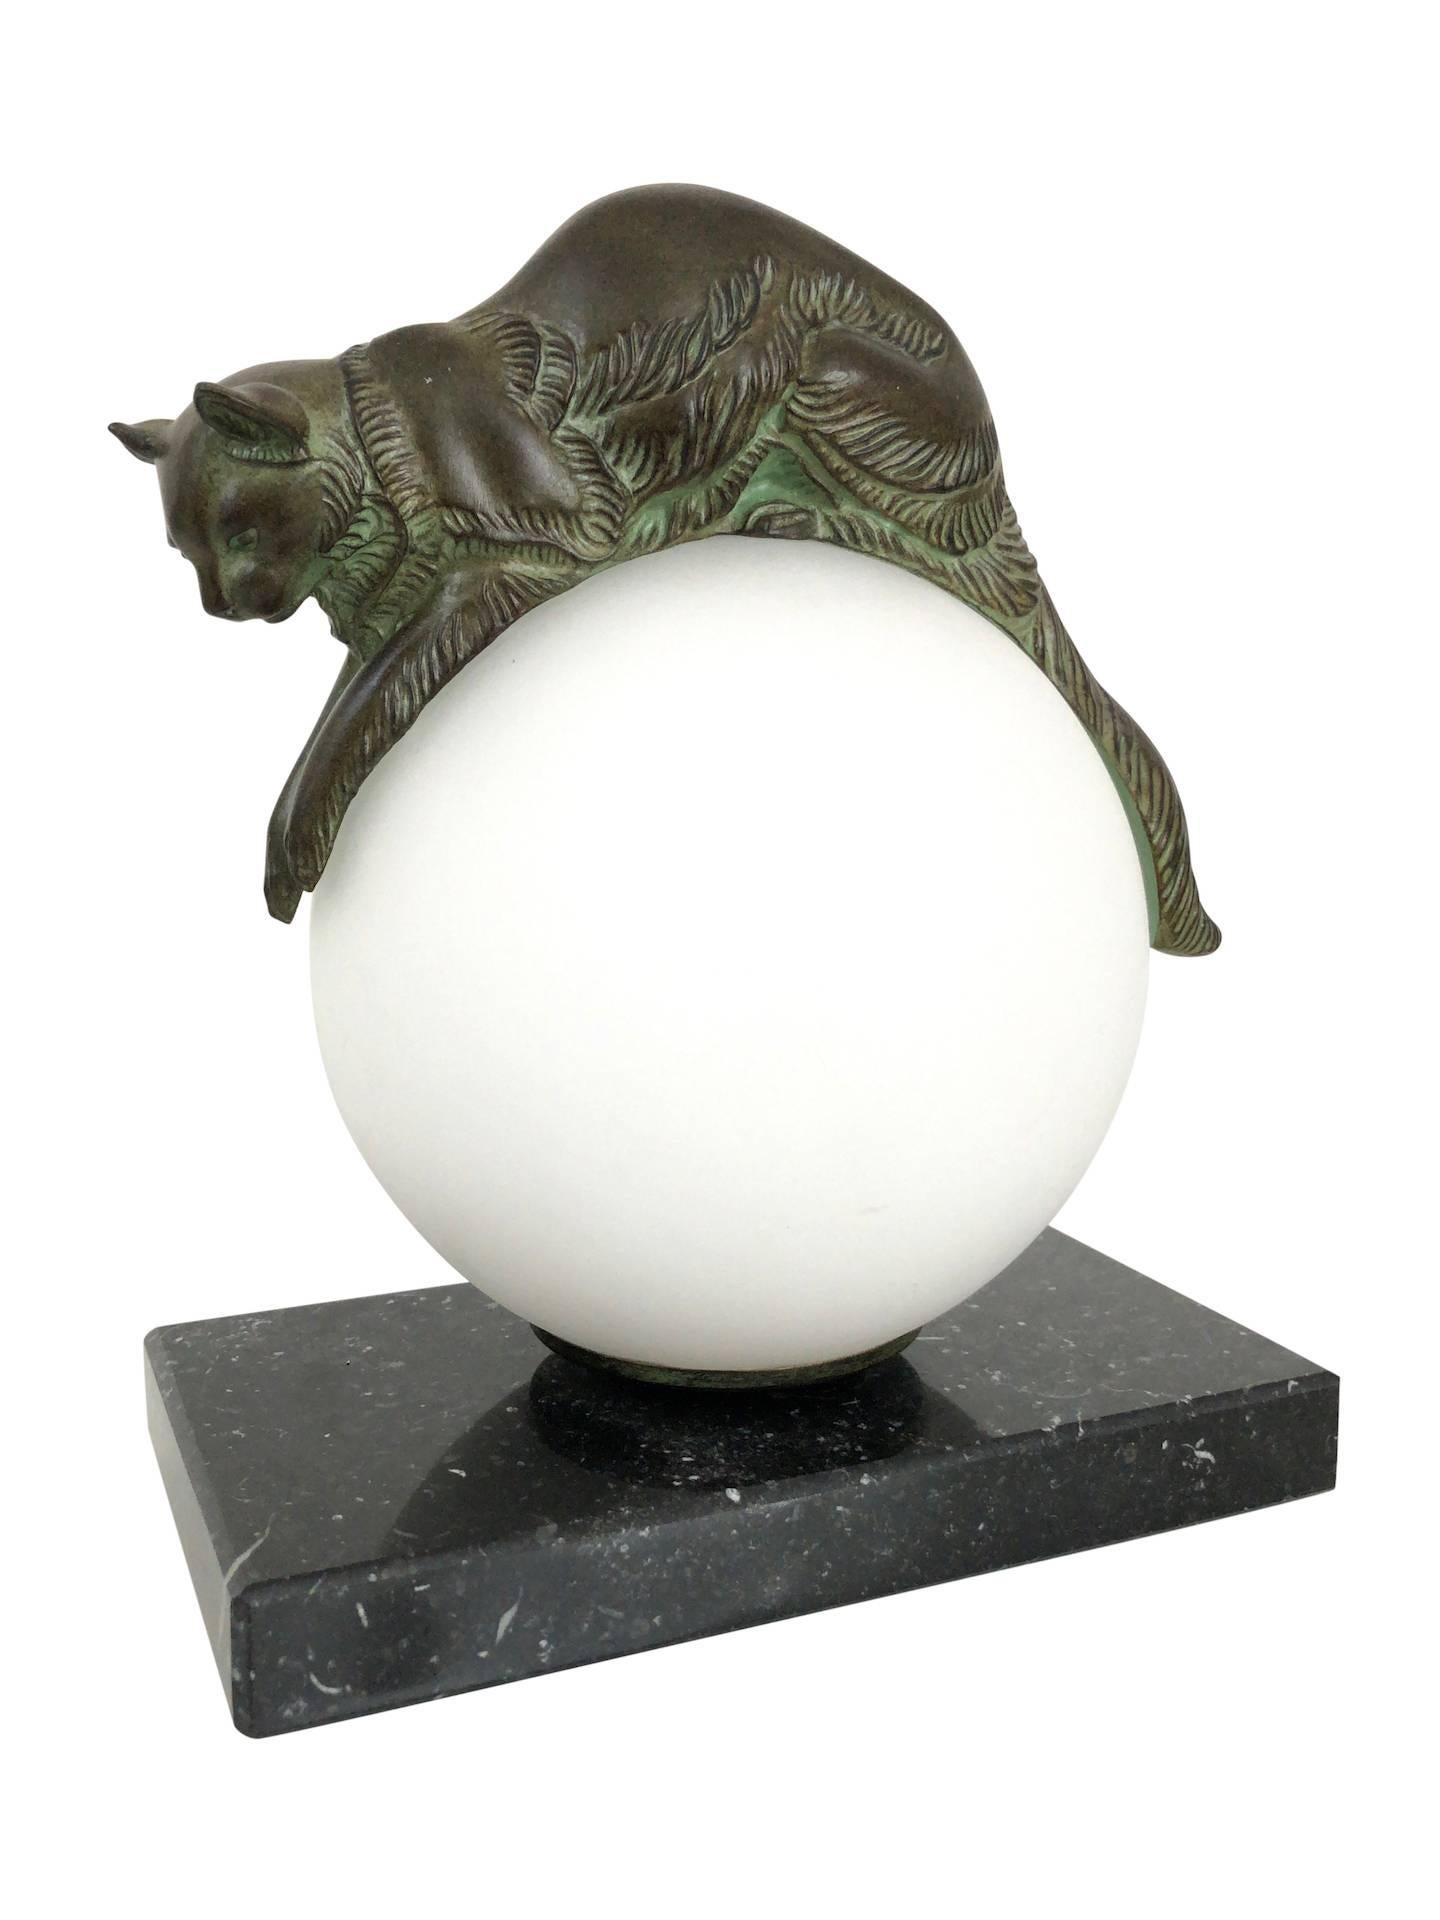 “Équilibré” (French: balanced) 
Cat keeps balance on a lighted glass ball 
Designed in France during the roaring 1920s by “Gaillard”, signed 
Original “Max Le Verrier” 
Art Deco style, France.

Sculpture made in “Régule” (spelter)
Green